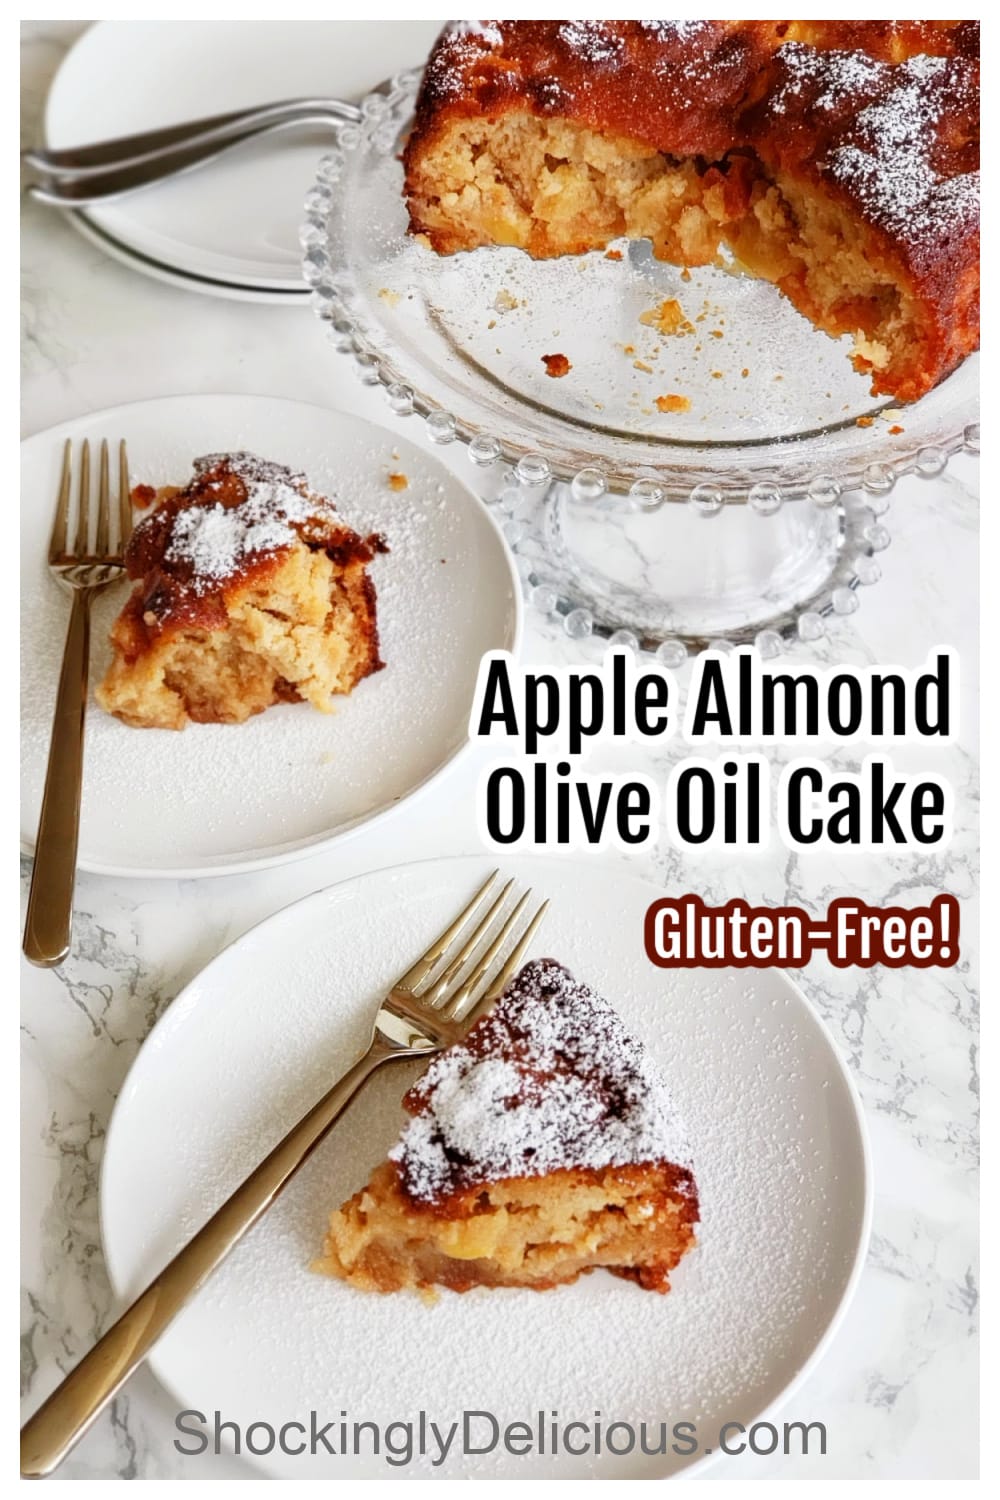 2 slices of Apple Almond Olive Oil Cake on white plates with the rest of the cake on a glass cakestand behind, and recipe title superimposed on top